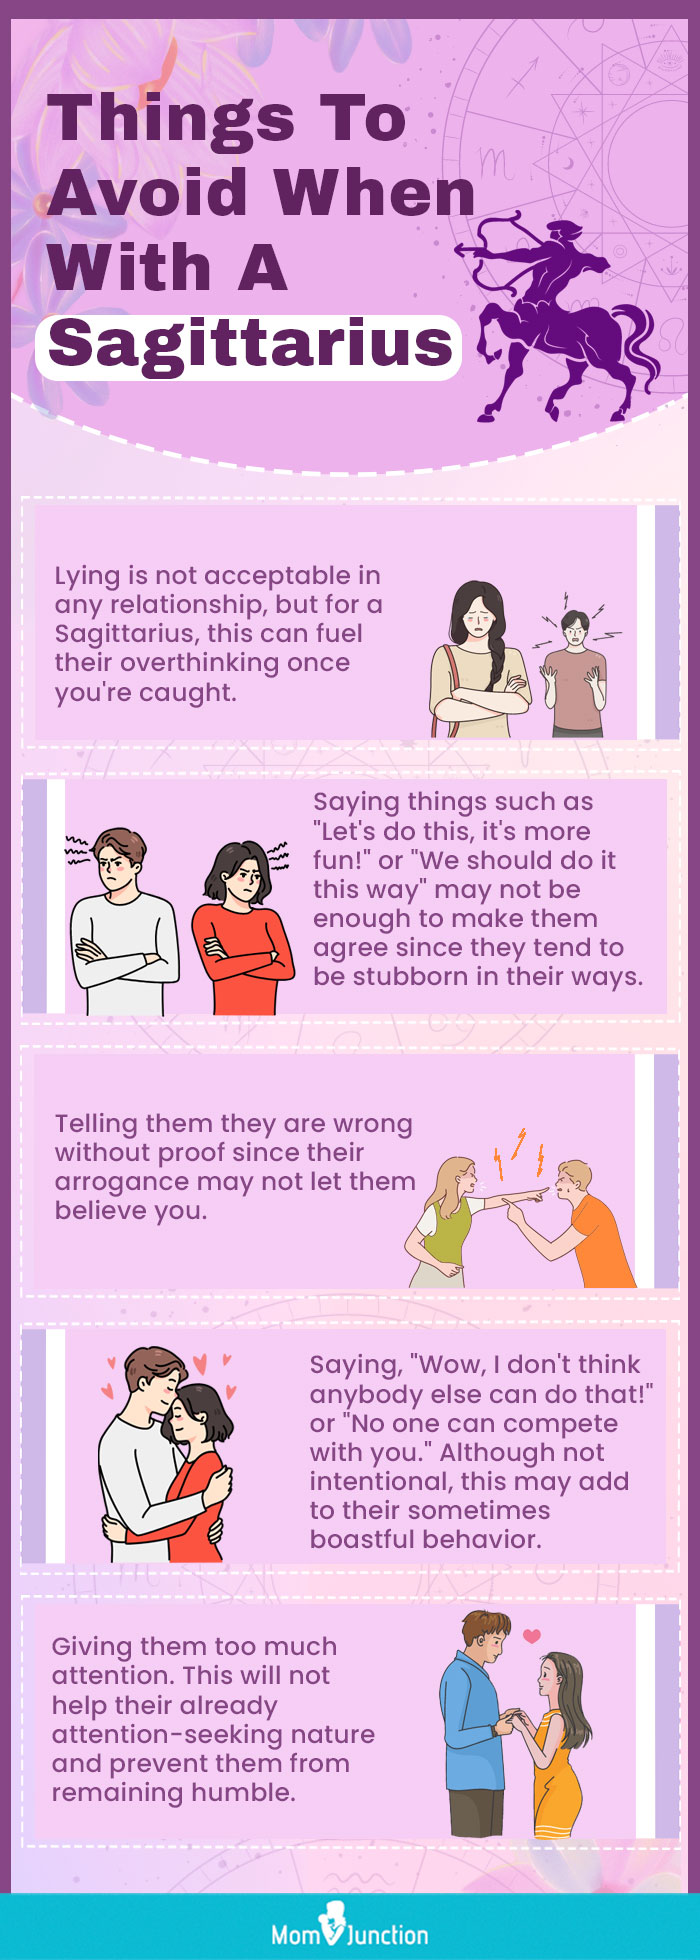 things you should not do or say around a sagittarius (infographic)